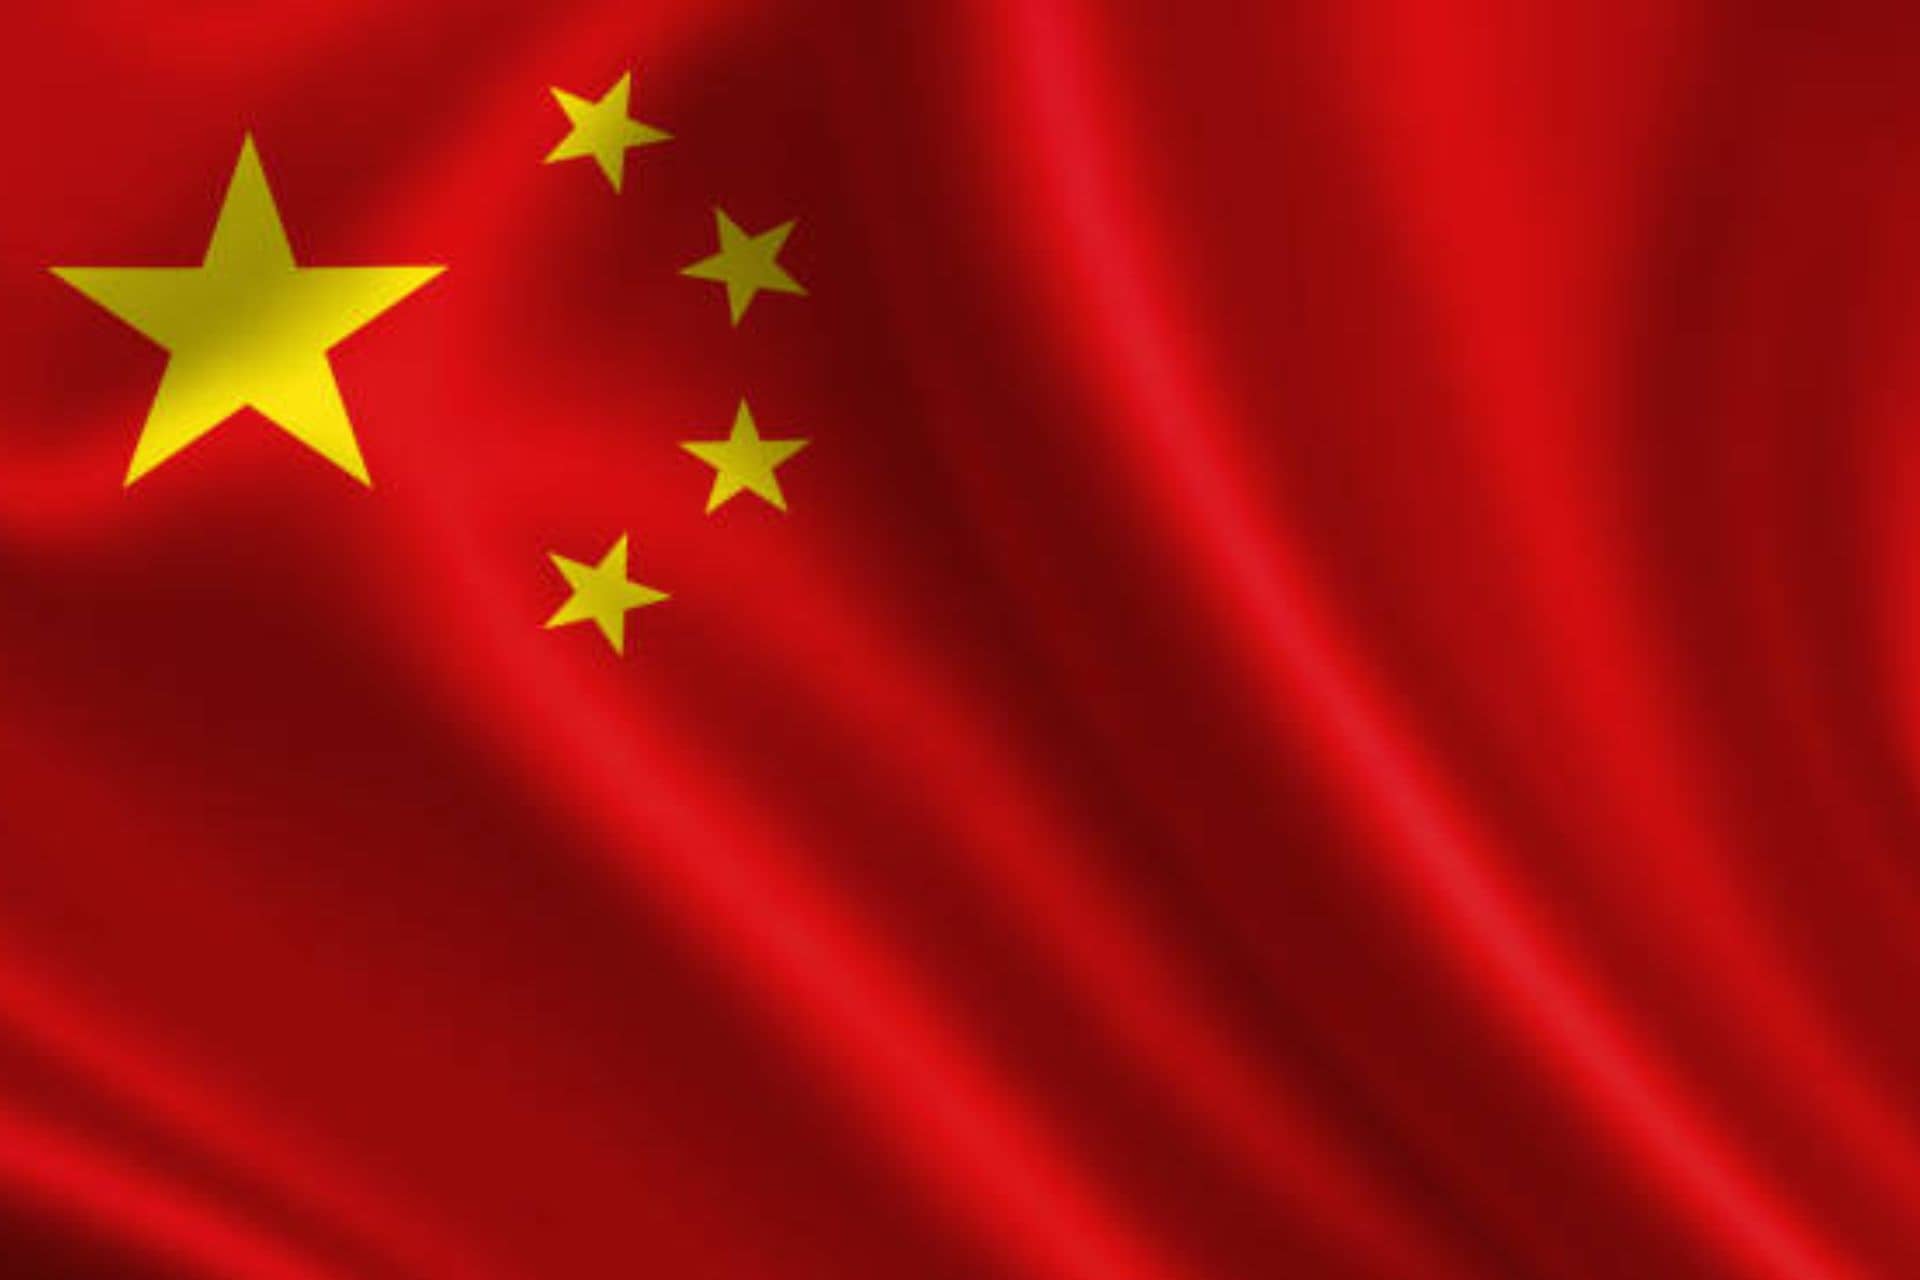 China bans Windows OS as well as Intel and AMD chips in government PCs